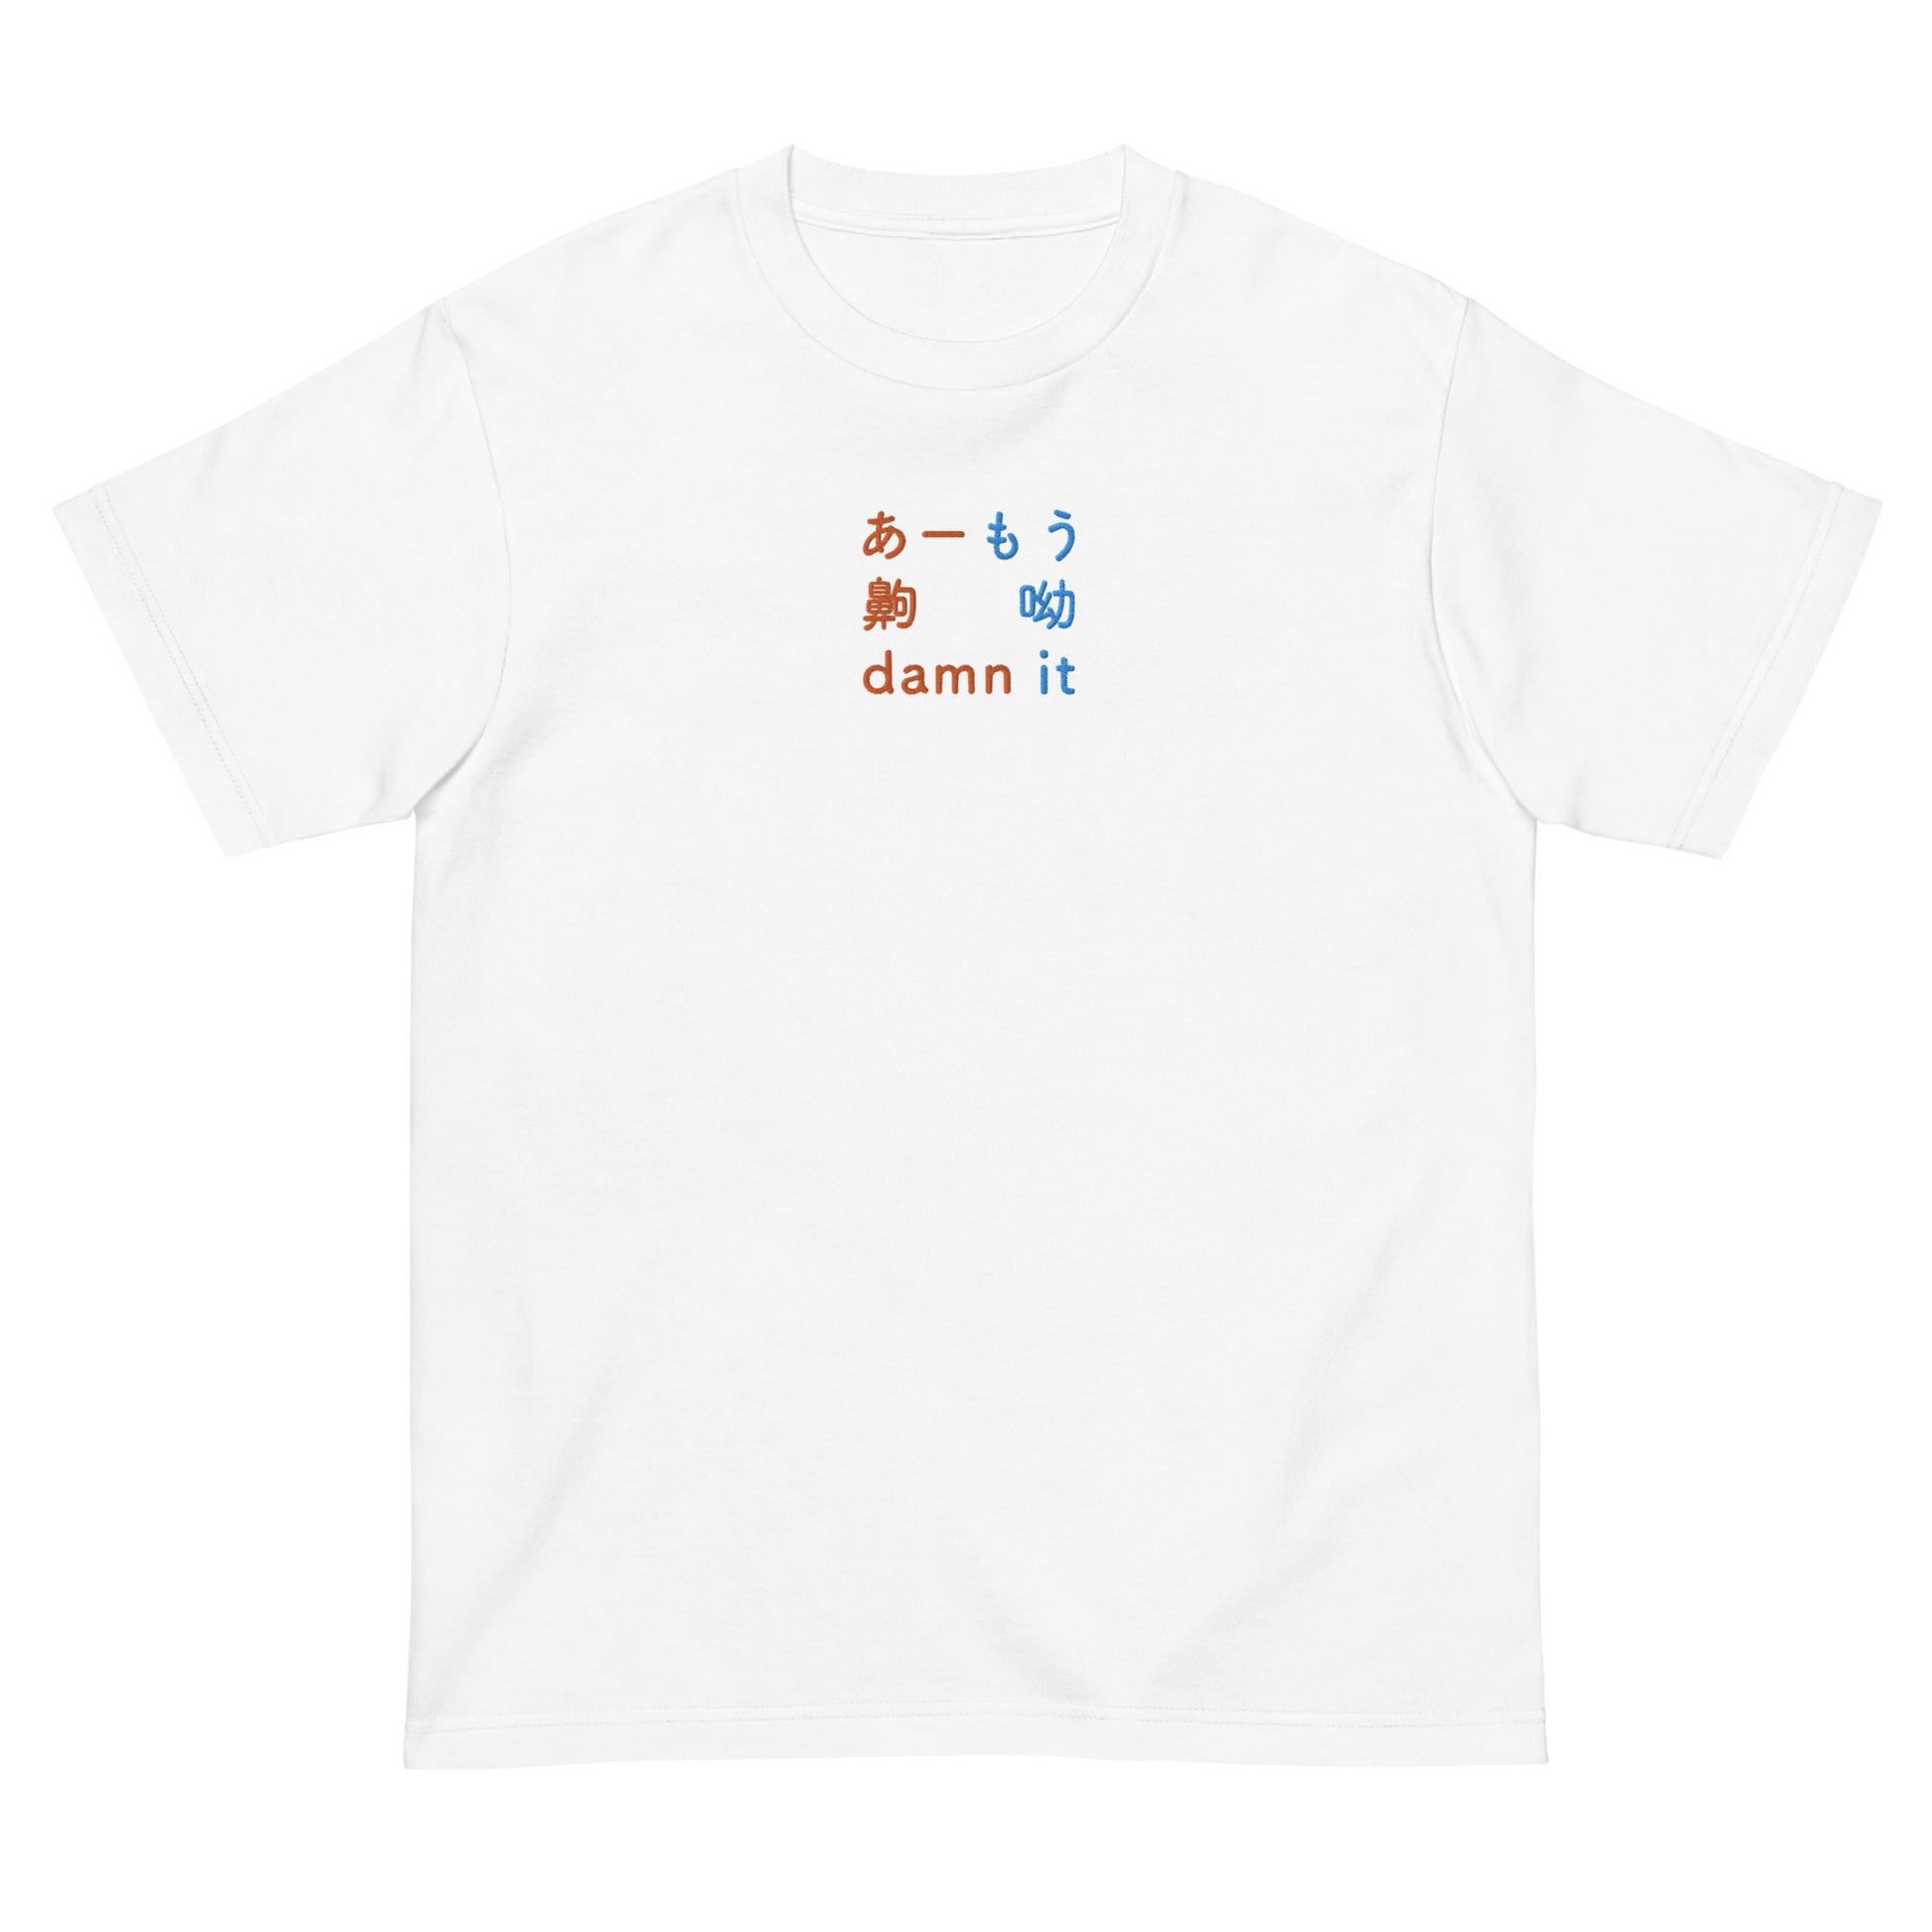 White High Quality Tee - Front Design with an Orange,Blue Embroidery "Damn it" in Japanese,Chinese and English